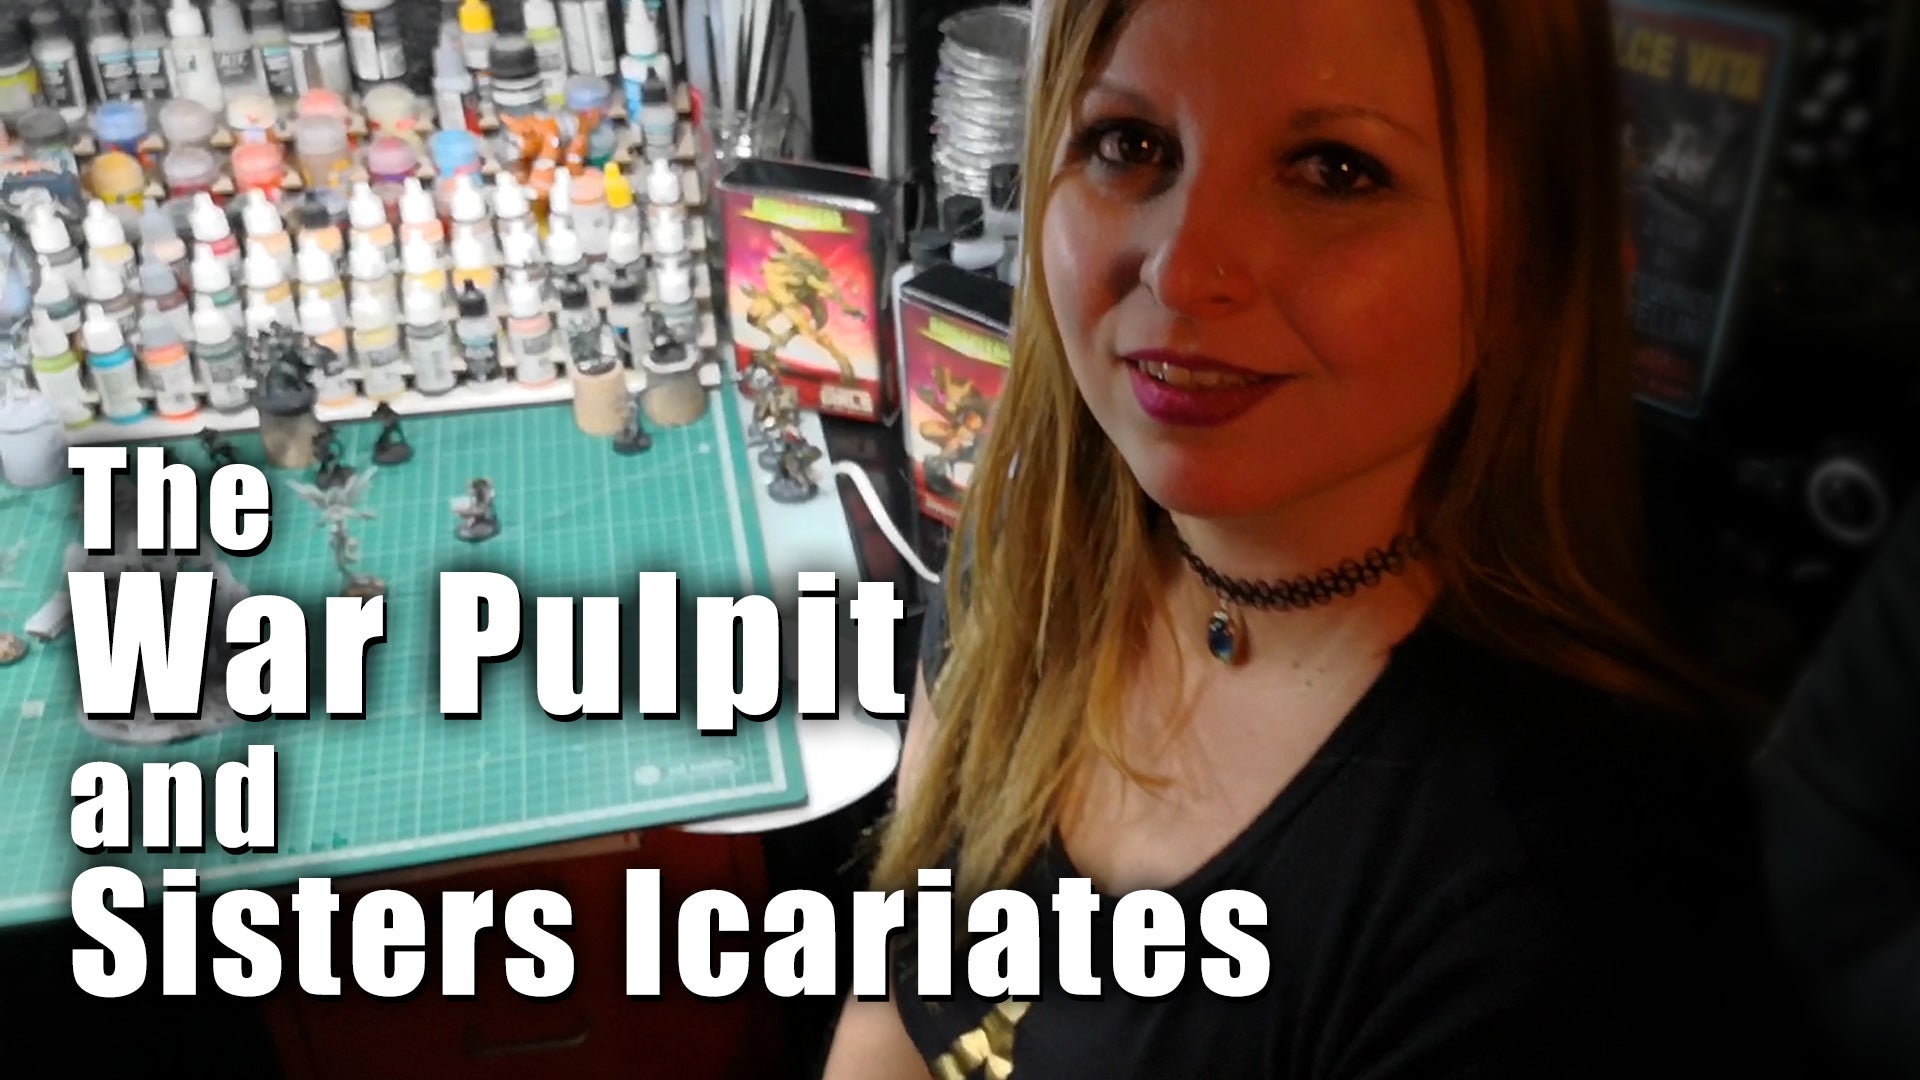 New video: a closer look at The War Pulpit and the Sisters Icariates